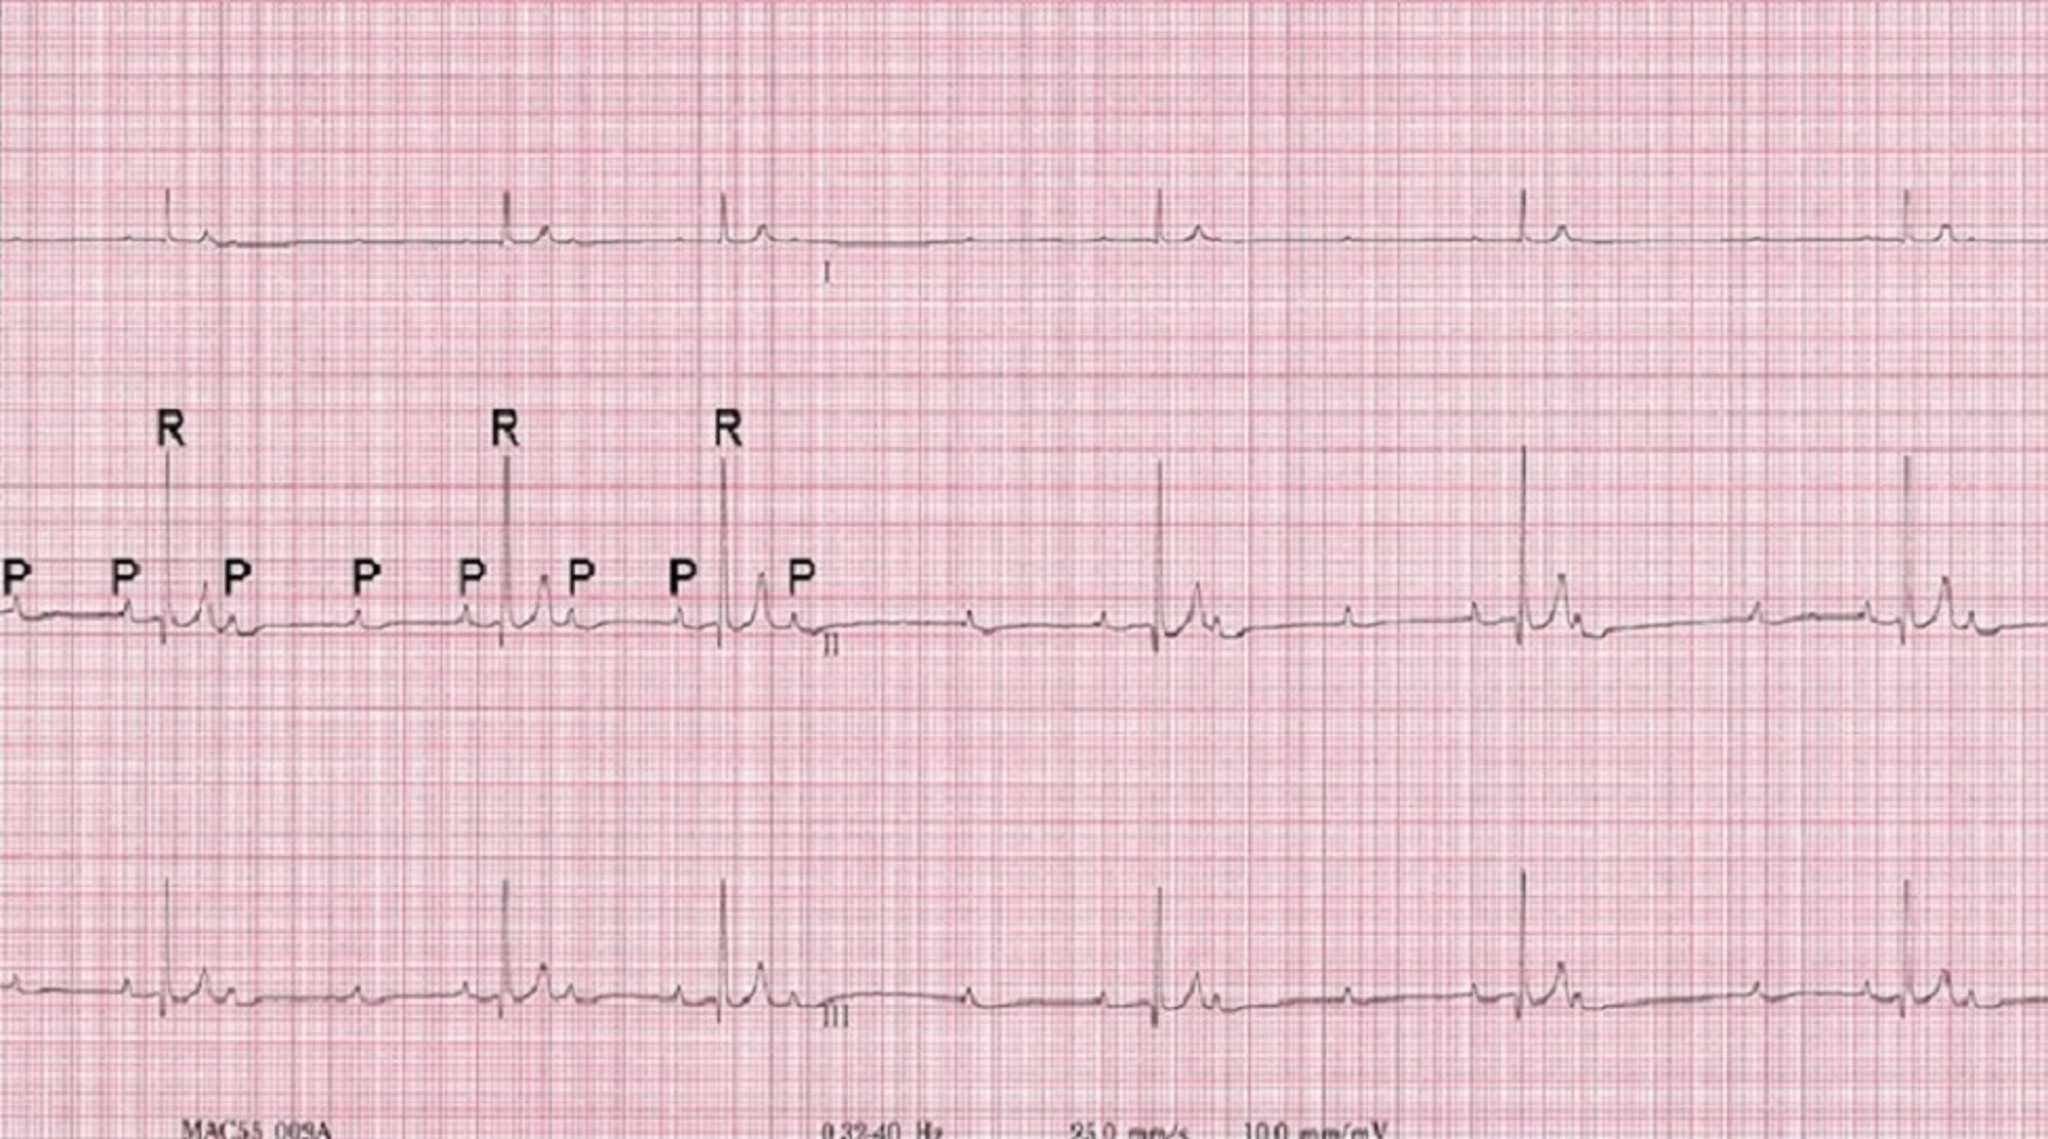 wandering pacemaker in dogs